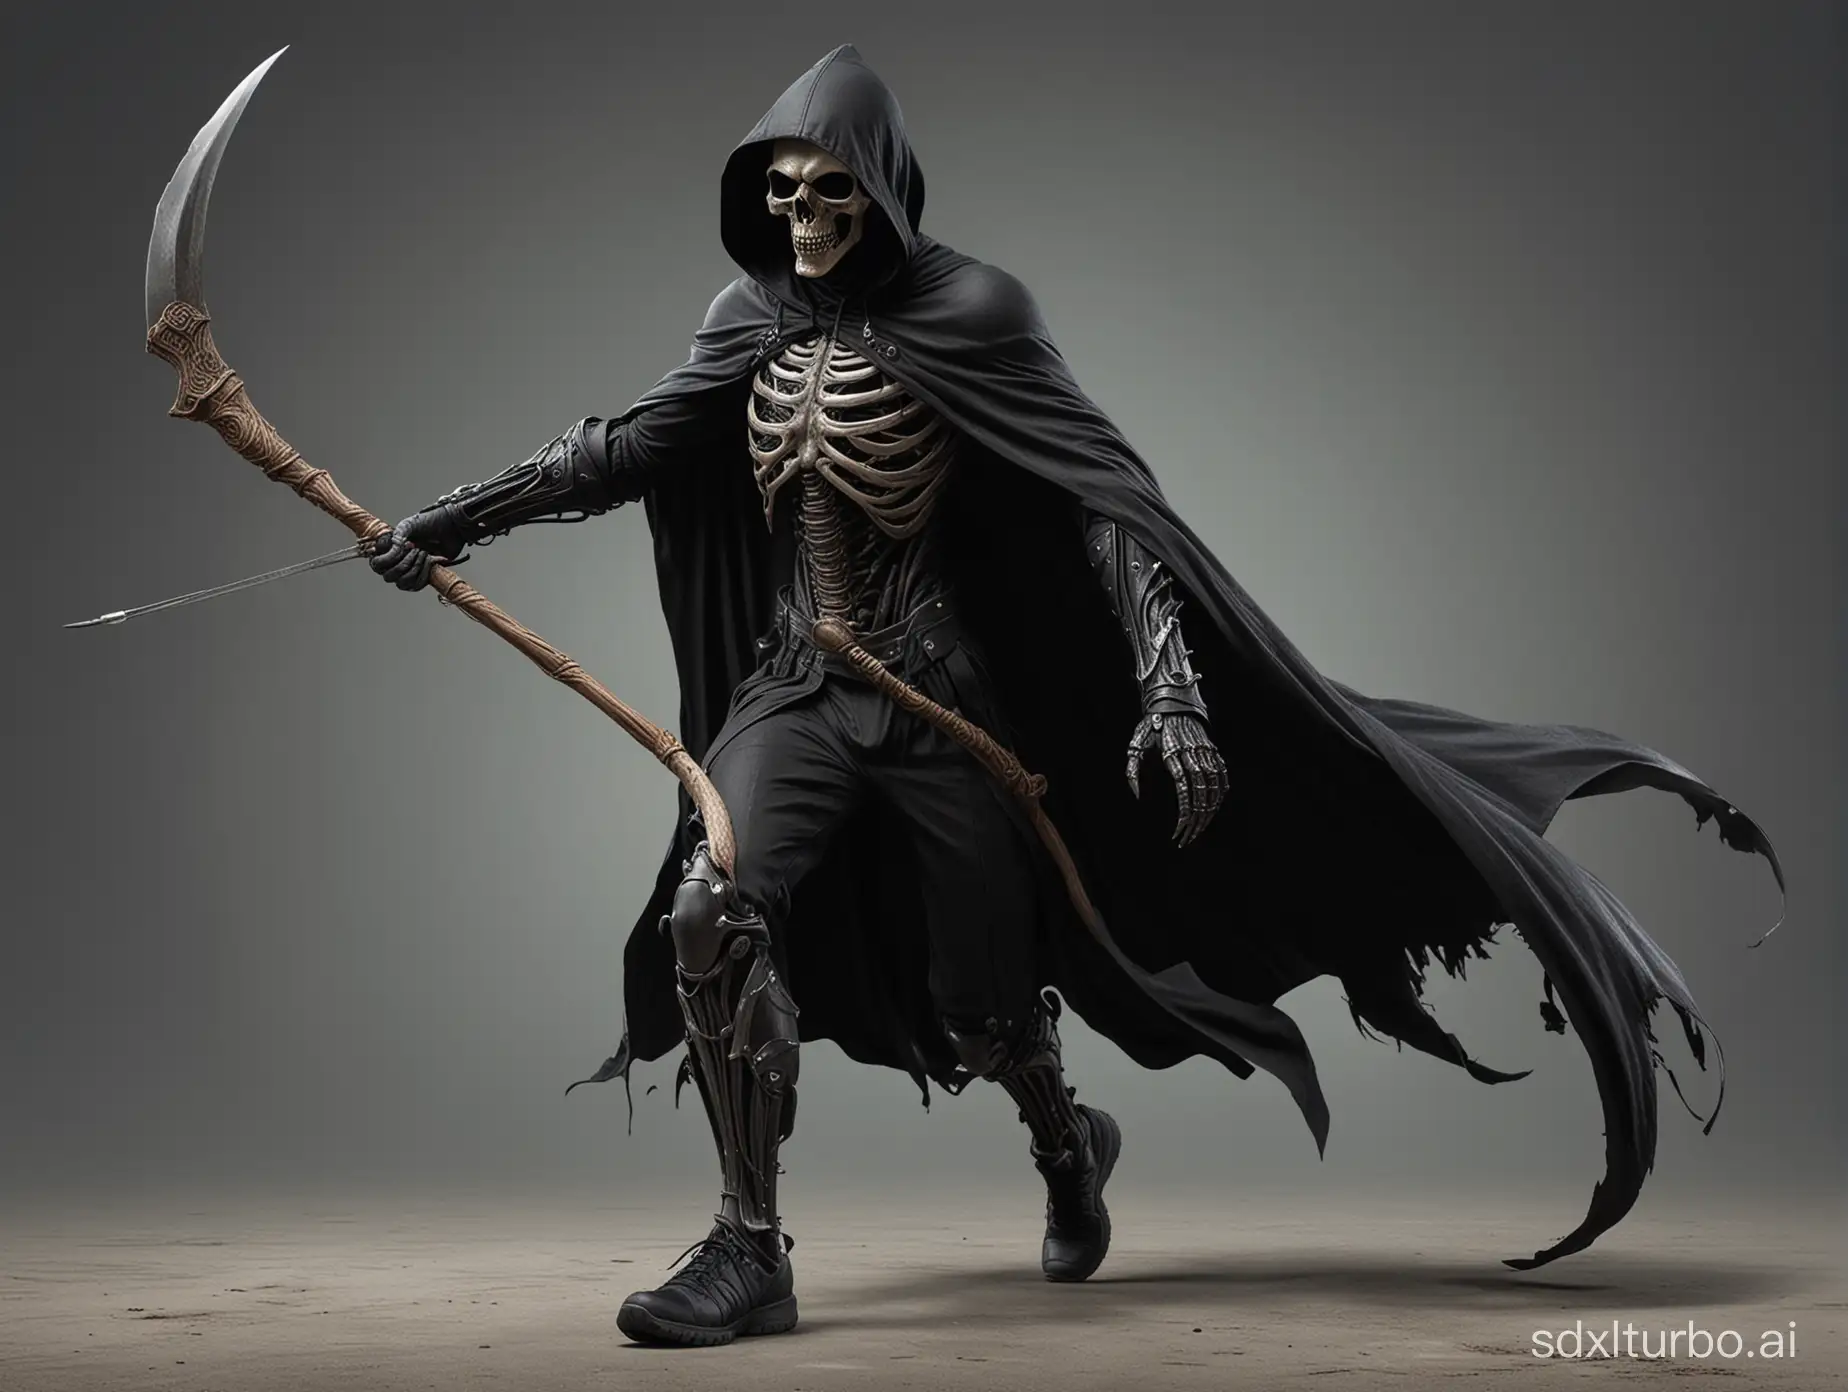 A super realistic photo rendering of the Grimm Reaper running while clutching his upright scythe in his skeletal left hand and wearing a black cloak, running shoes and a black jogging suit.